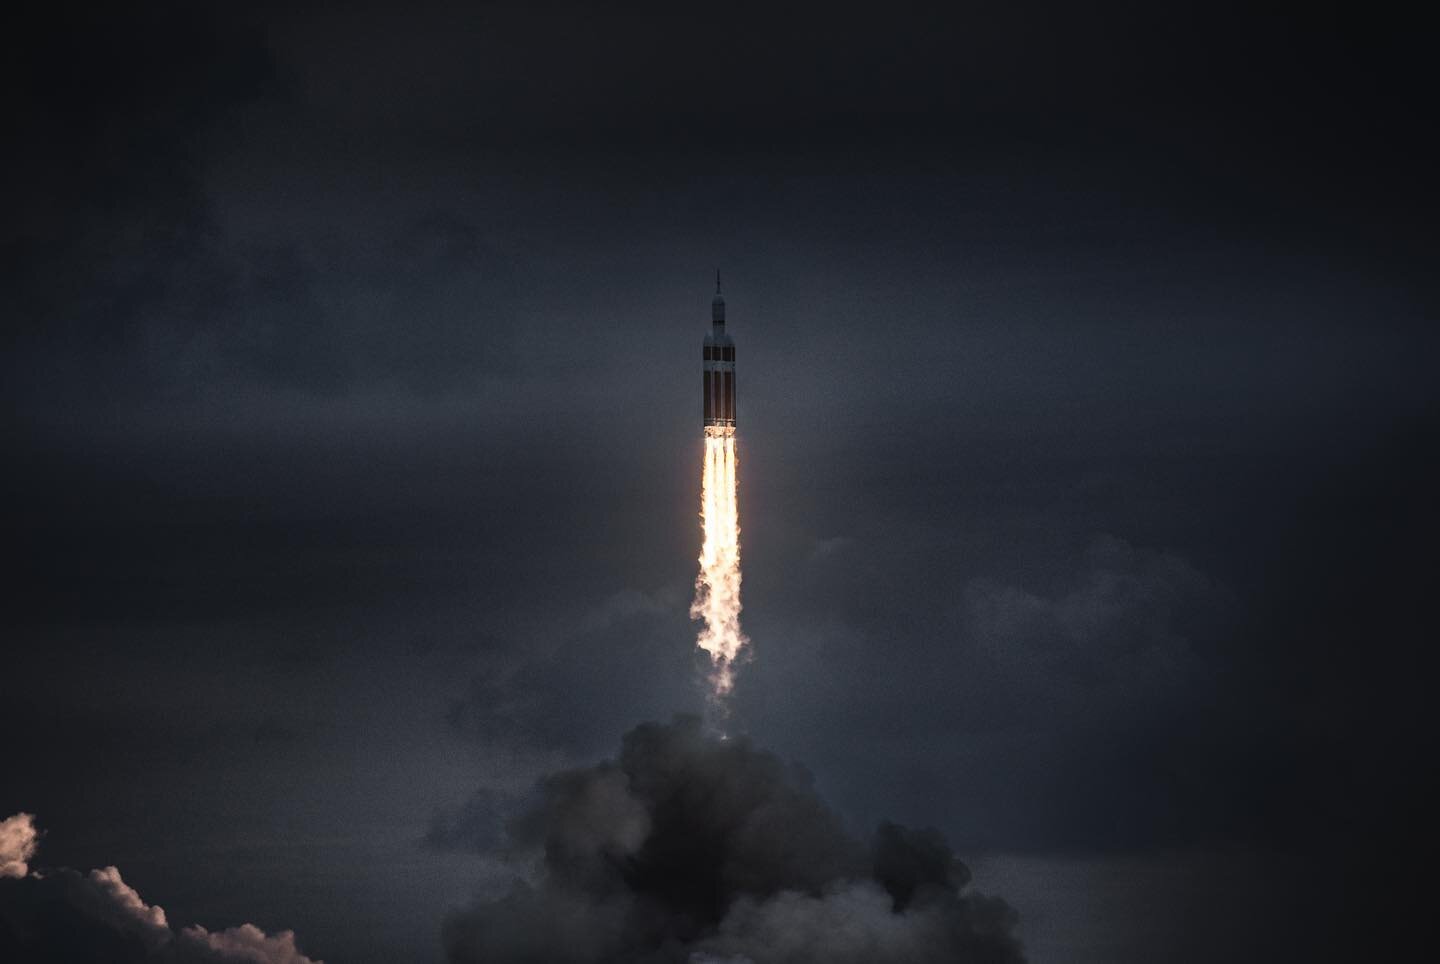 rocket scrolling by! reapproaching a few photos for a new series of prints. this one&rsquo;s from the first uncrewed launch of Orion / same rocket at the end of The Martian. feels good diving back in with fresh eyes.